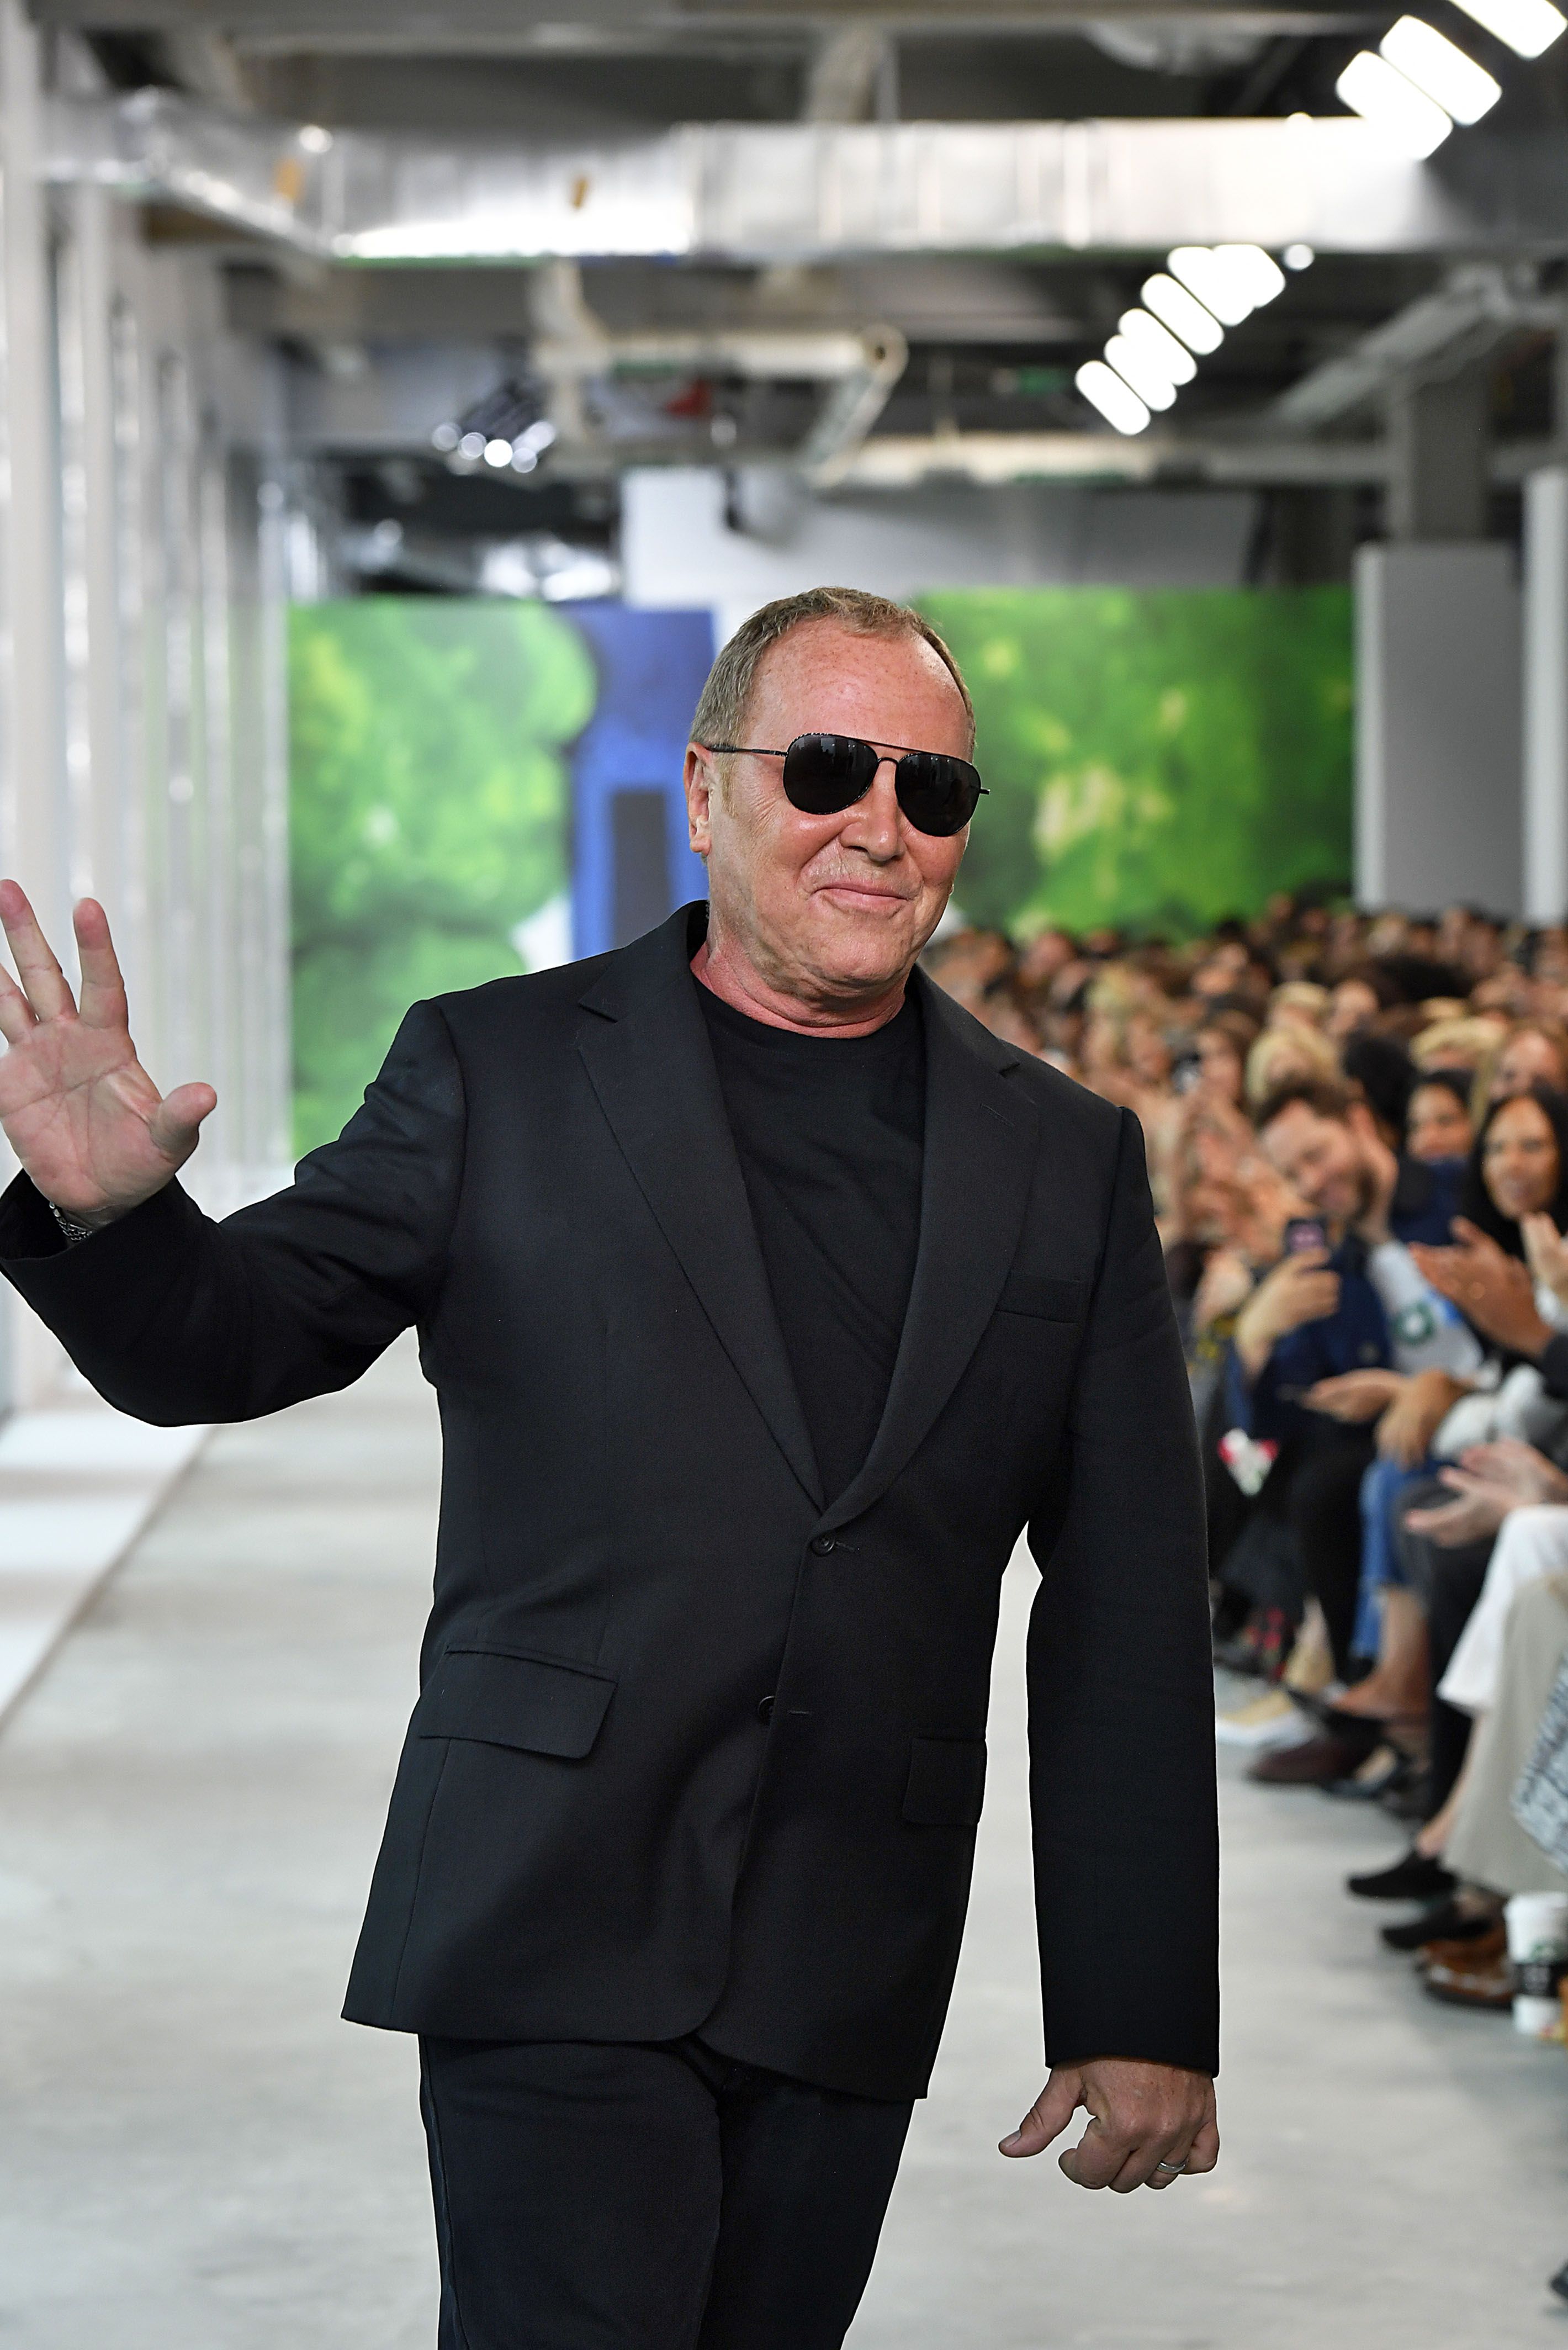 Designer Michael Kors holds first live fashion show since pandemic